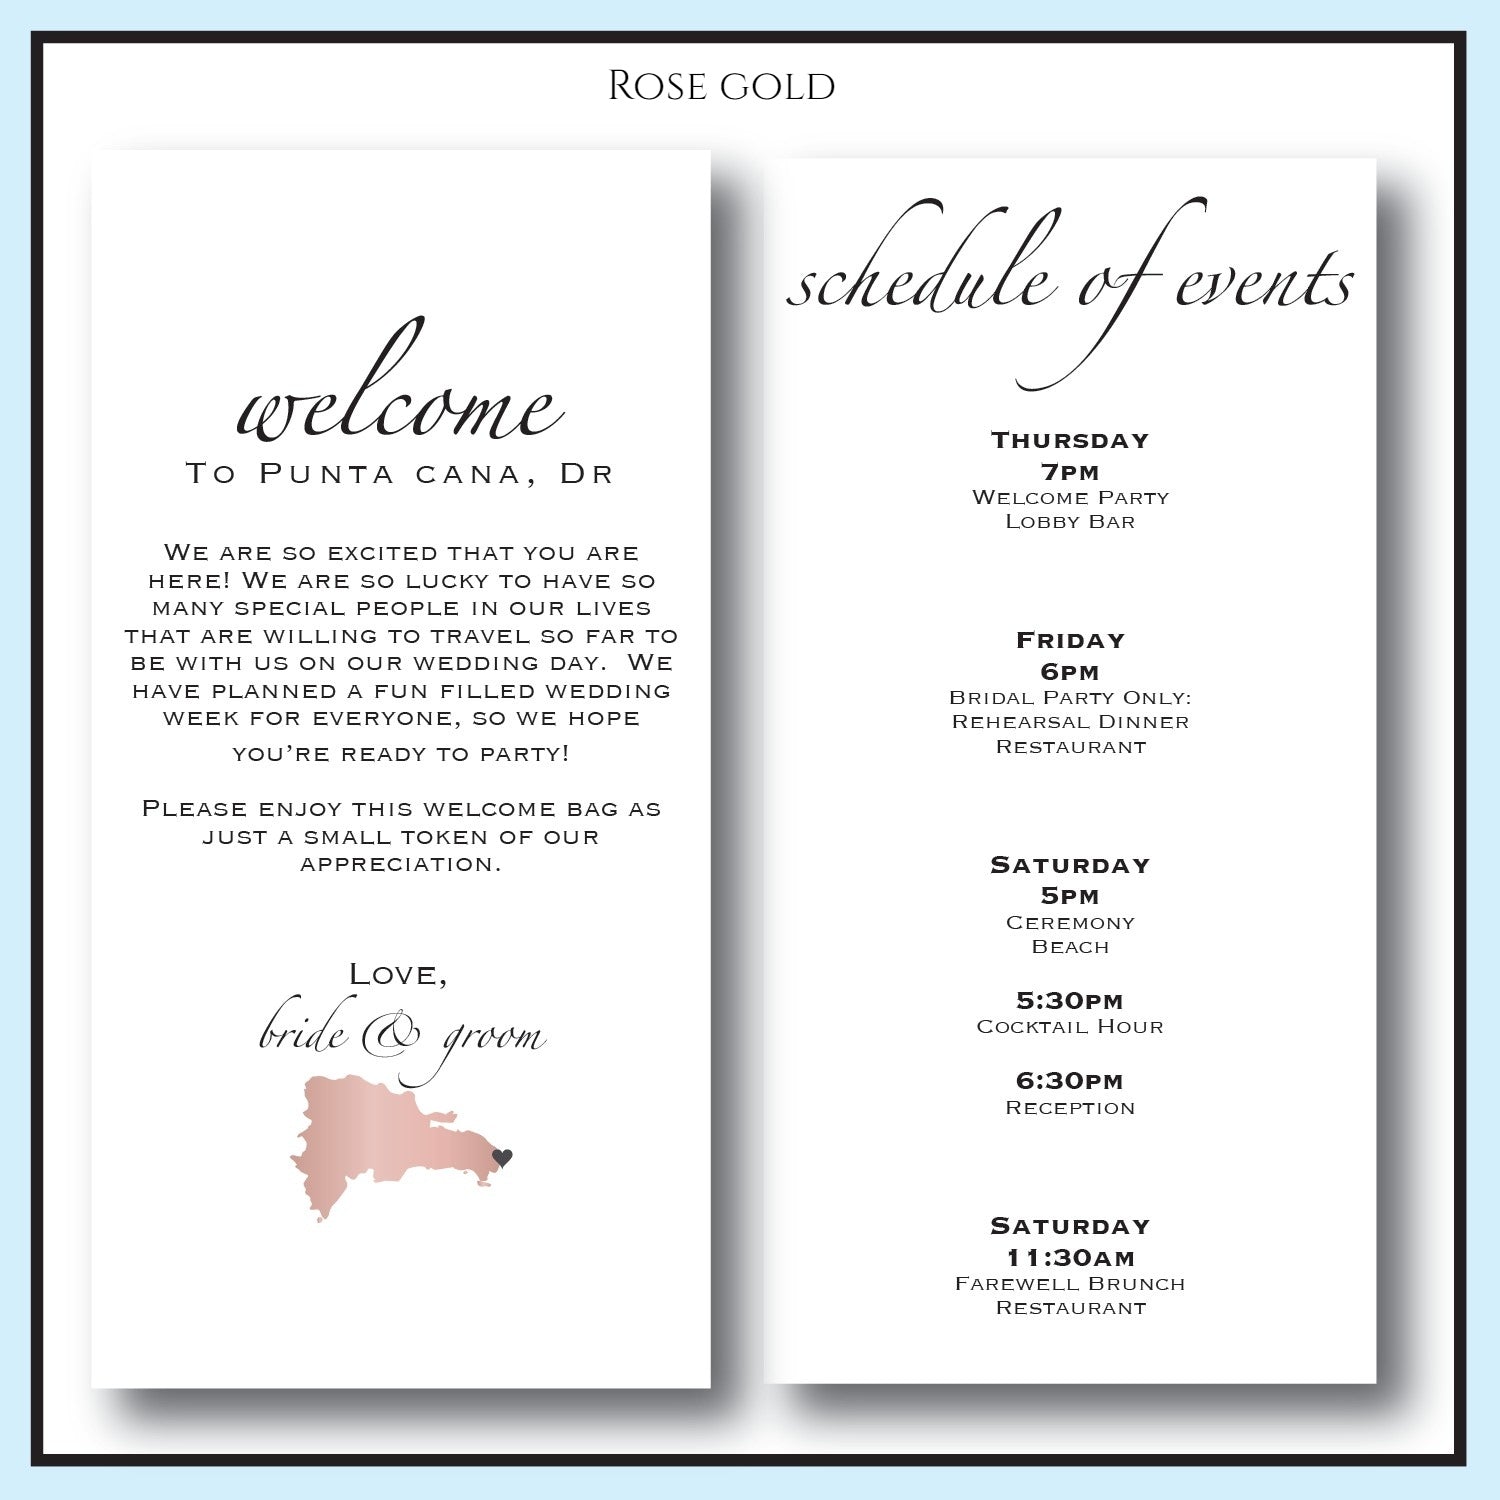 Rose Gold | Destination Wedding Welcome Letter and Itinerary